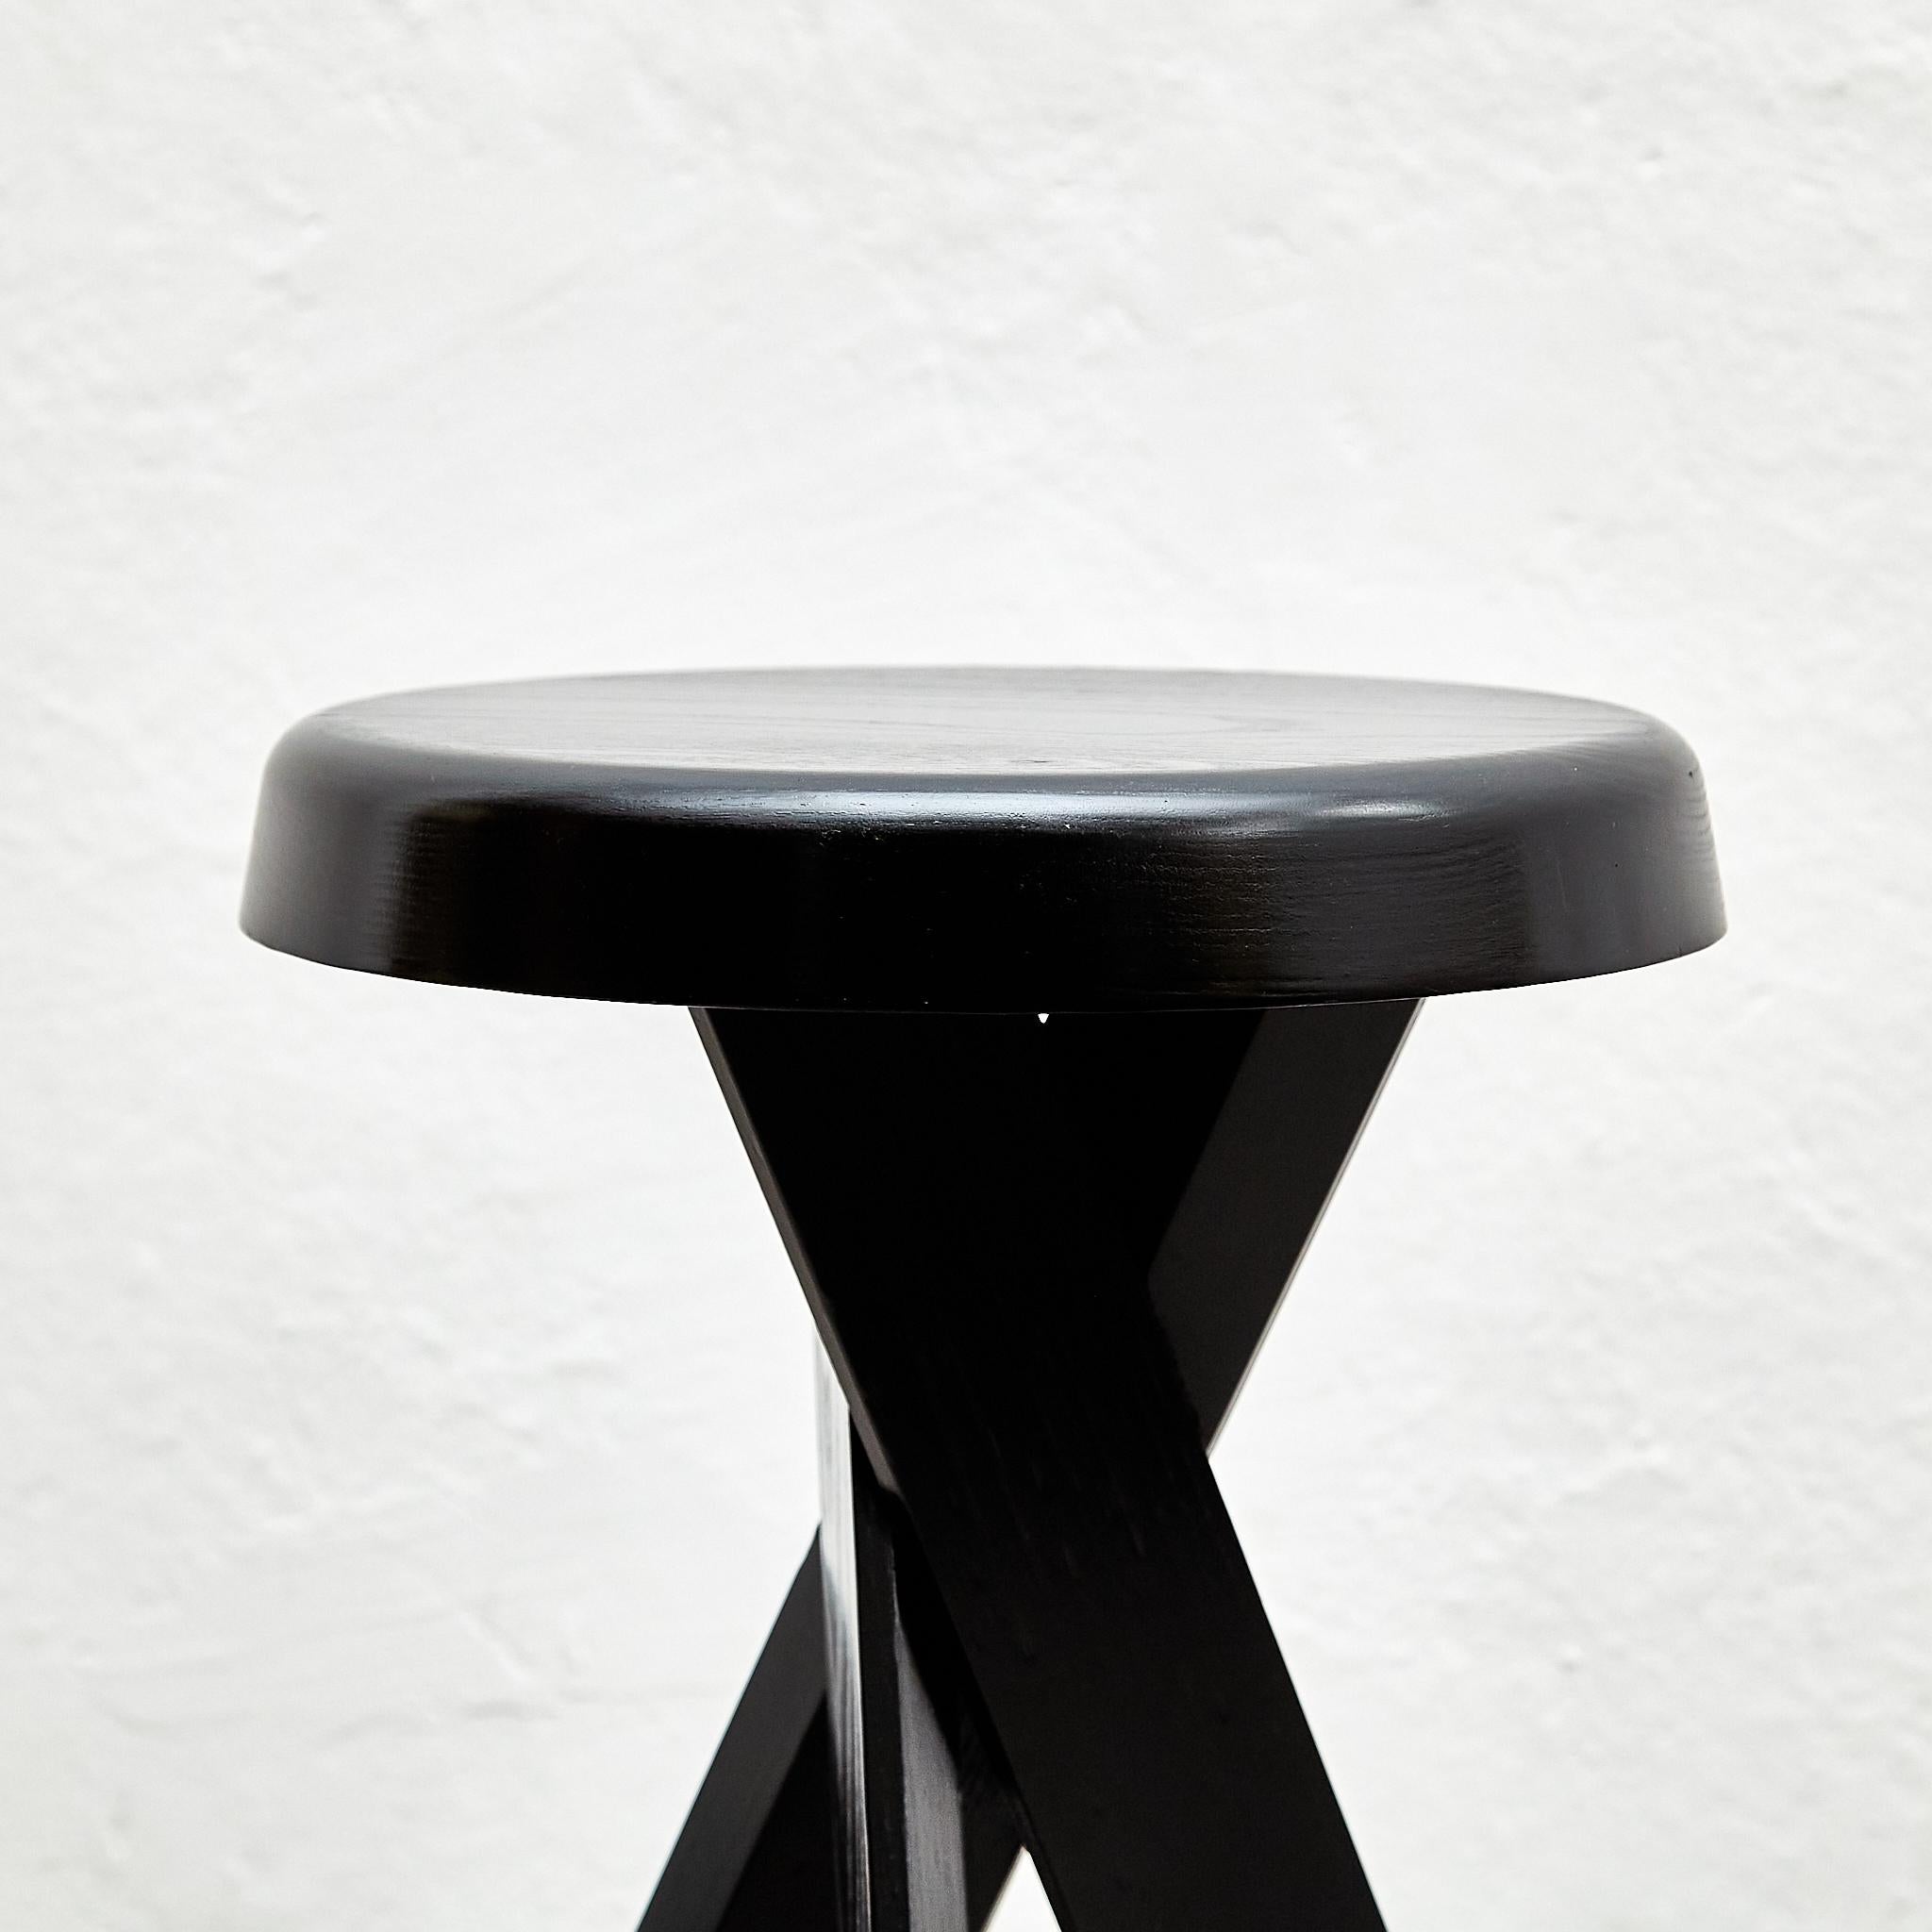 Wood Exclusive Pierre Chapo S31b Black Edition Stool, a Timeless French Masterpiece